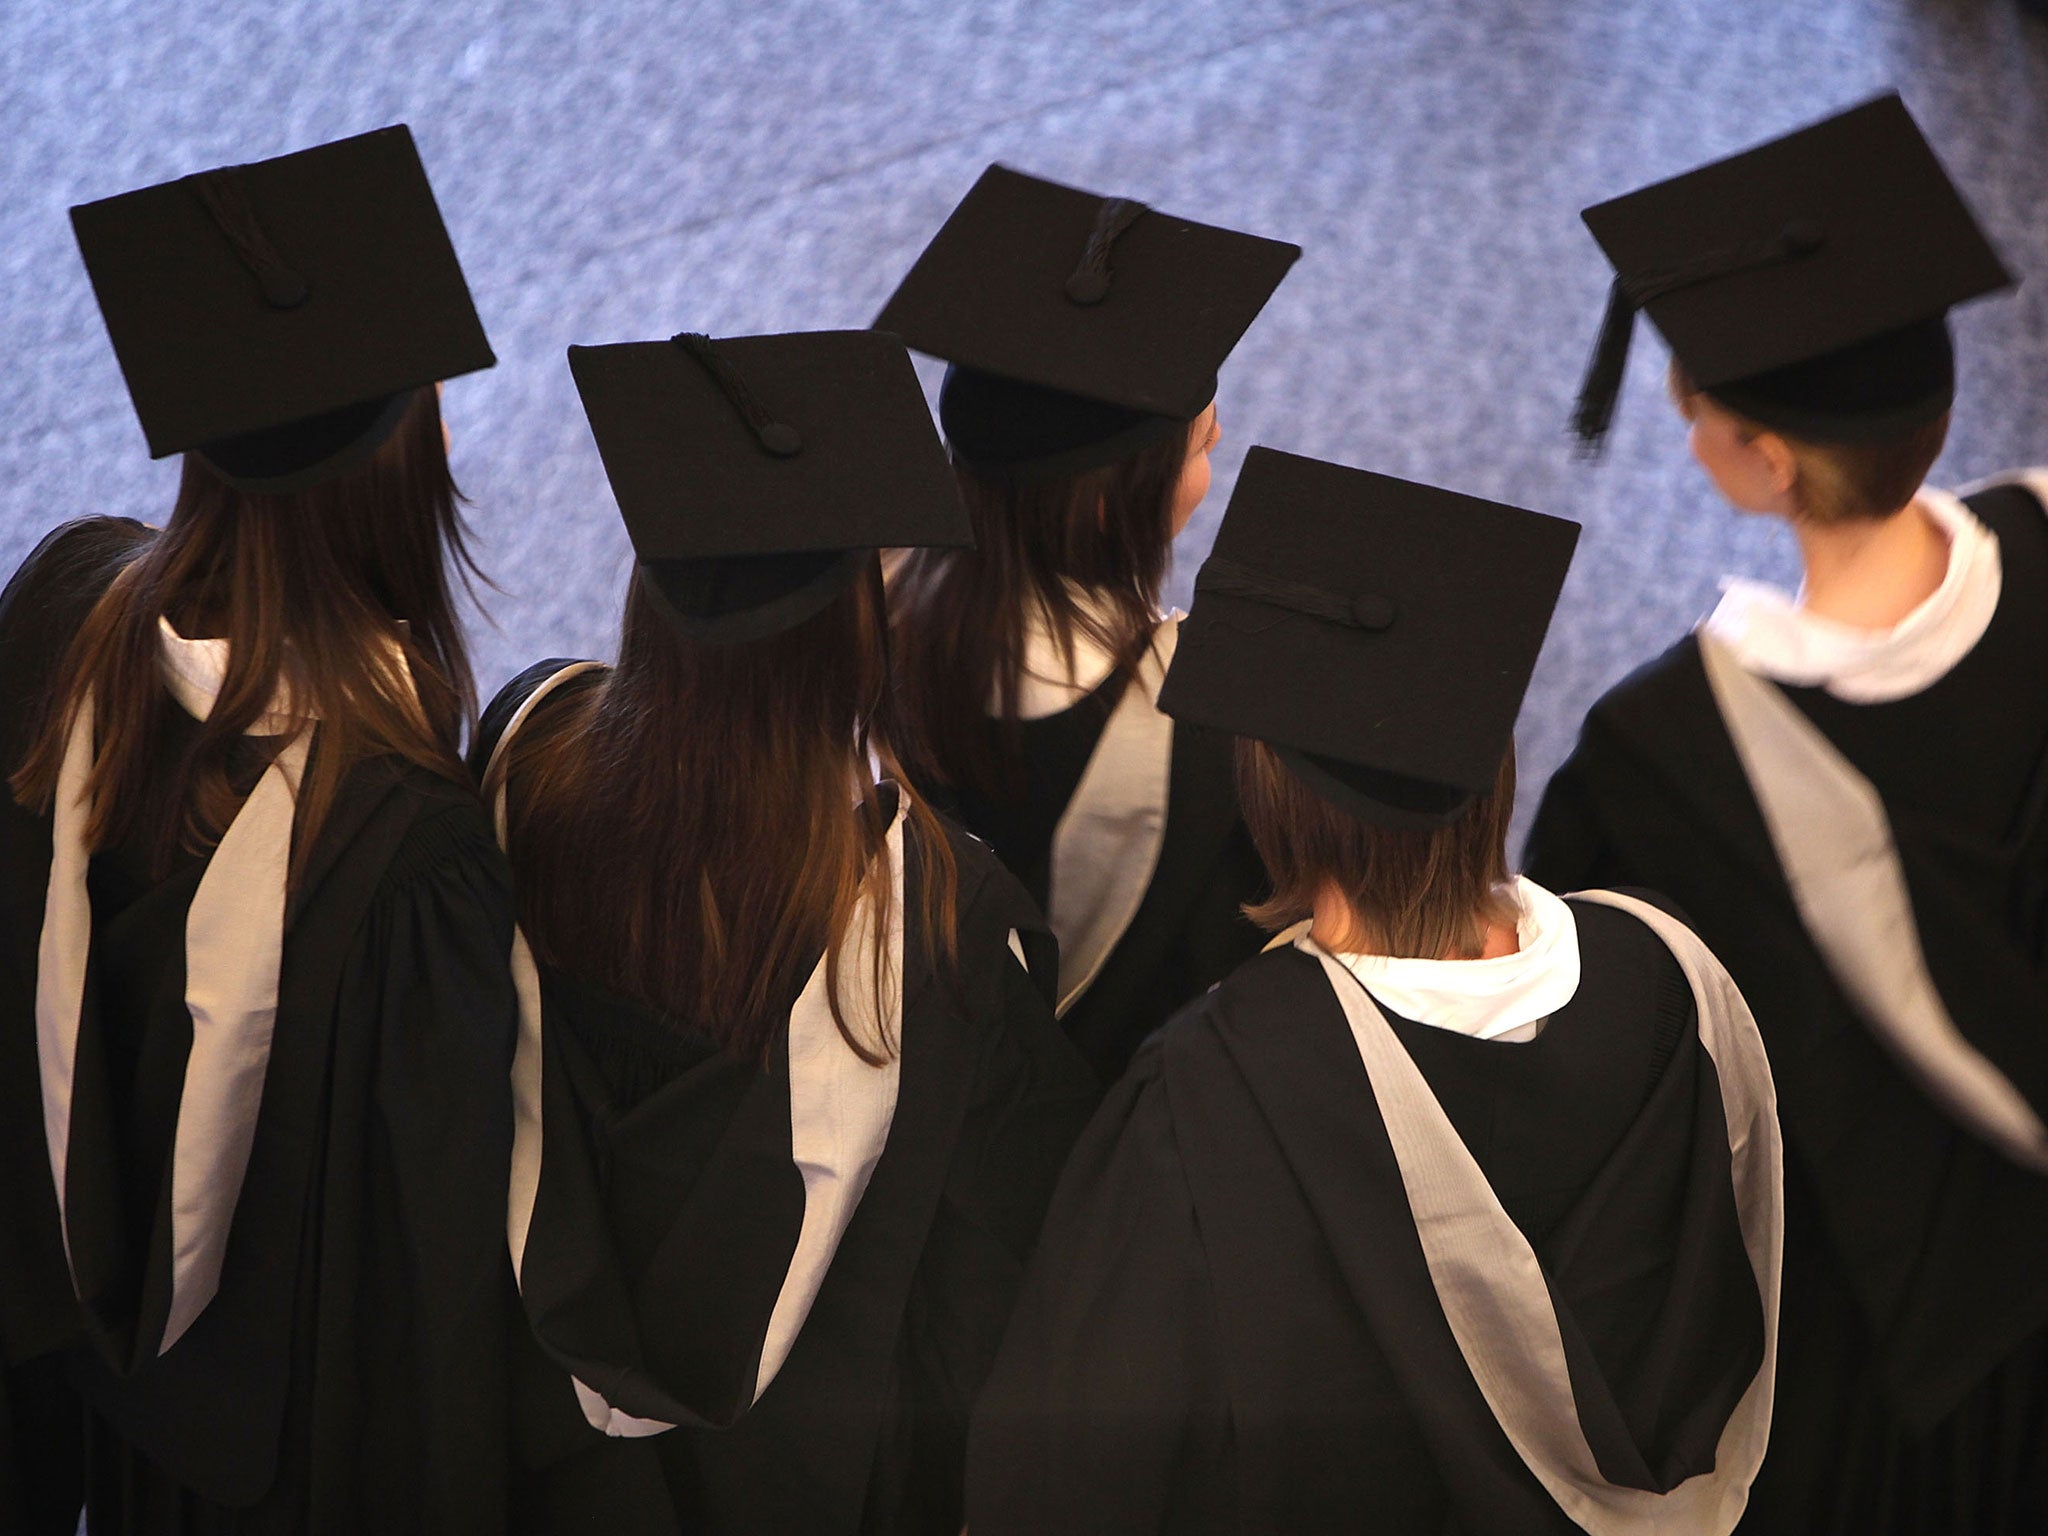 The number of international students rose by 3 per cent to 310,195